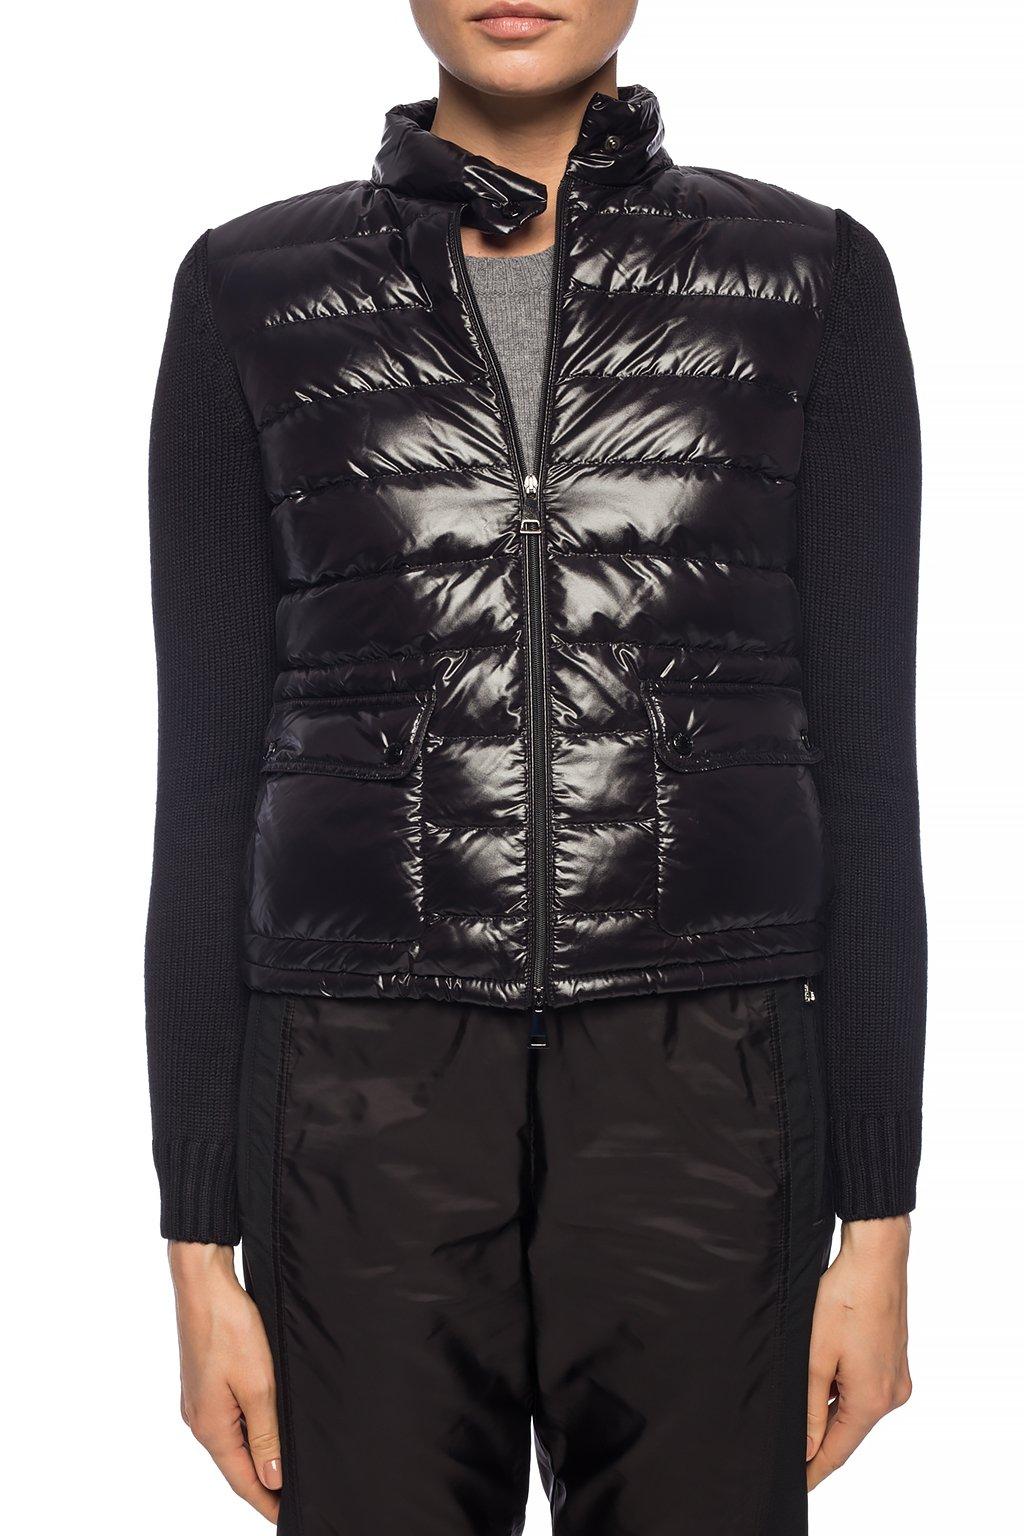 Moncler Wool Sweater With Quilted Insert in Black - Lyst